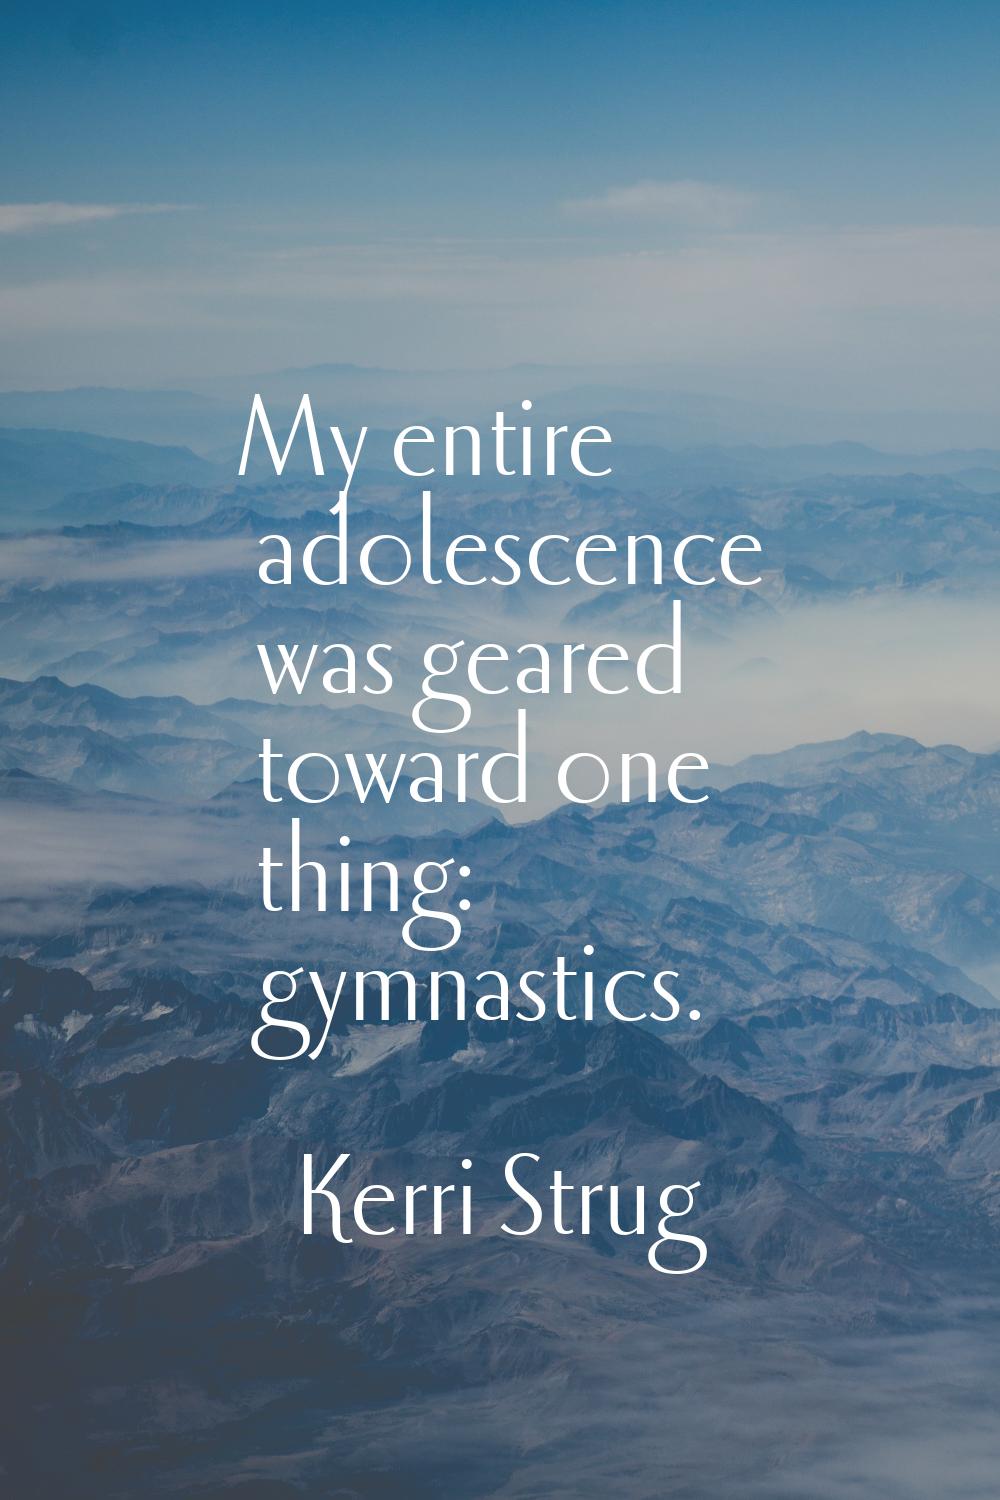 My entire adolescence was geared toward one thing: gymnastics.